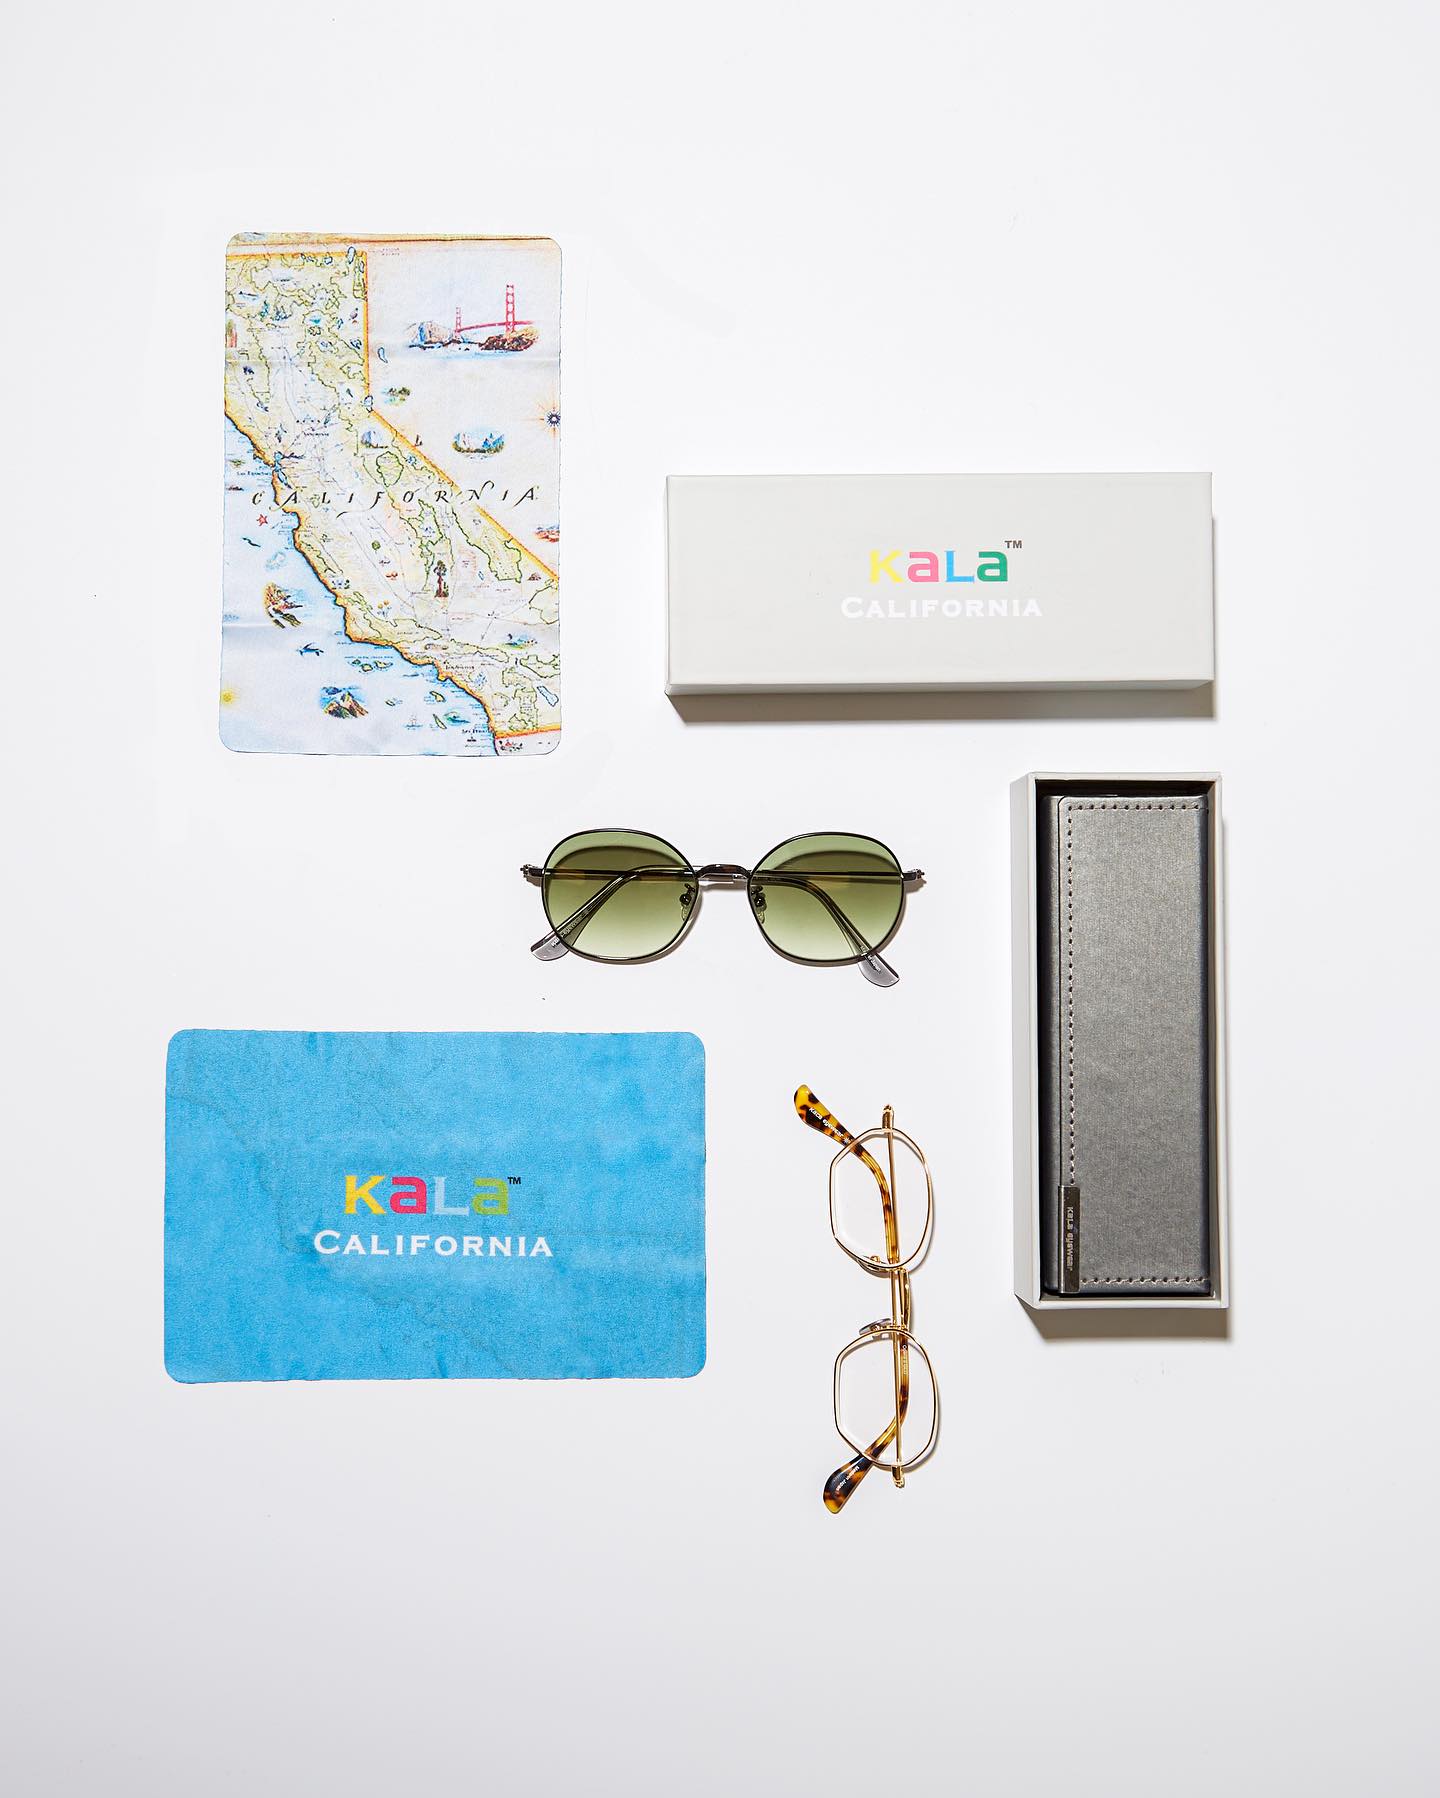 Looking down on neatly arranged objects - a map of California, a pair of sunglasses with green lenses, a pair of eyeglass frames, a microfiber cleaning cloth, a branded box and a case for the frames.